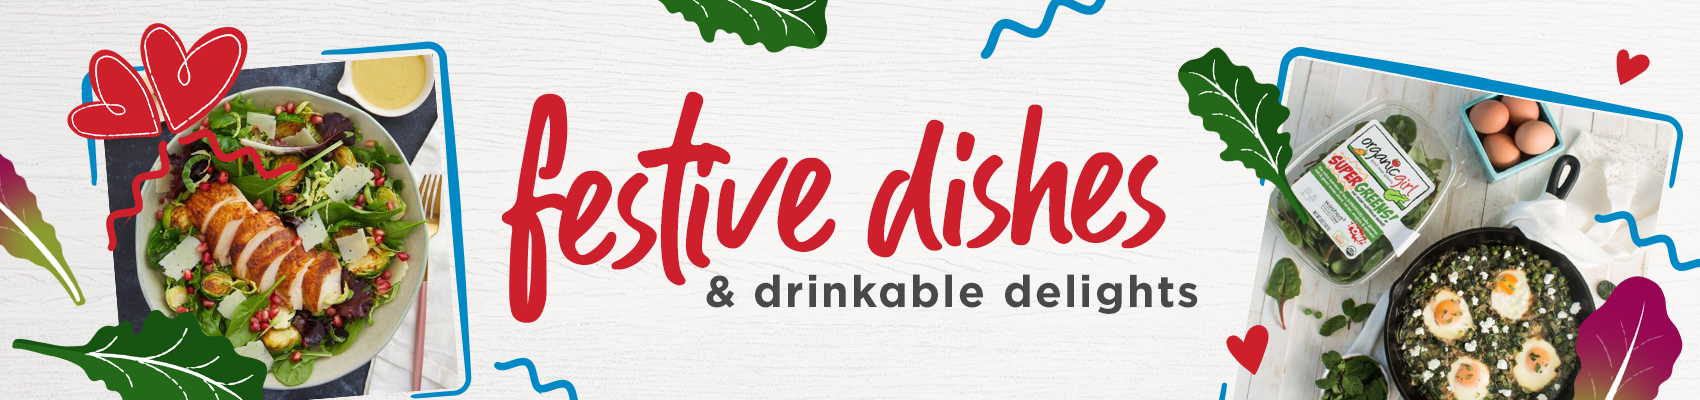 festive dishes & drinkable delights